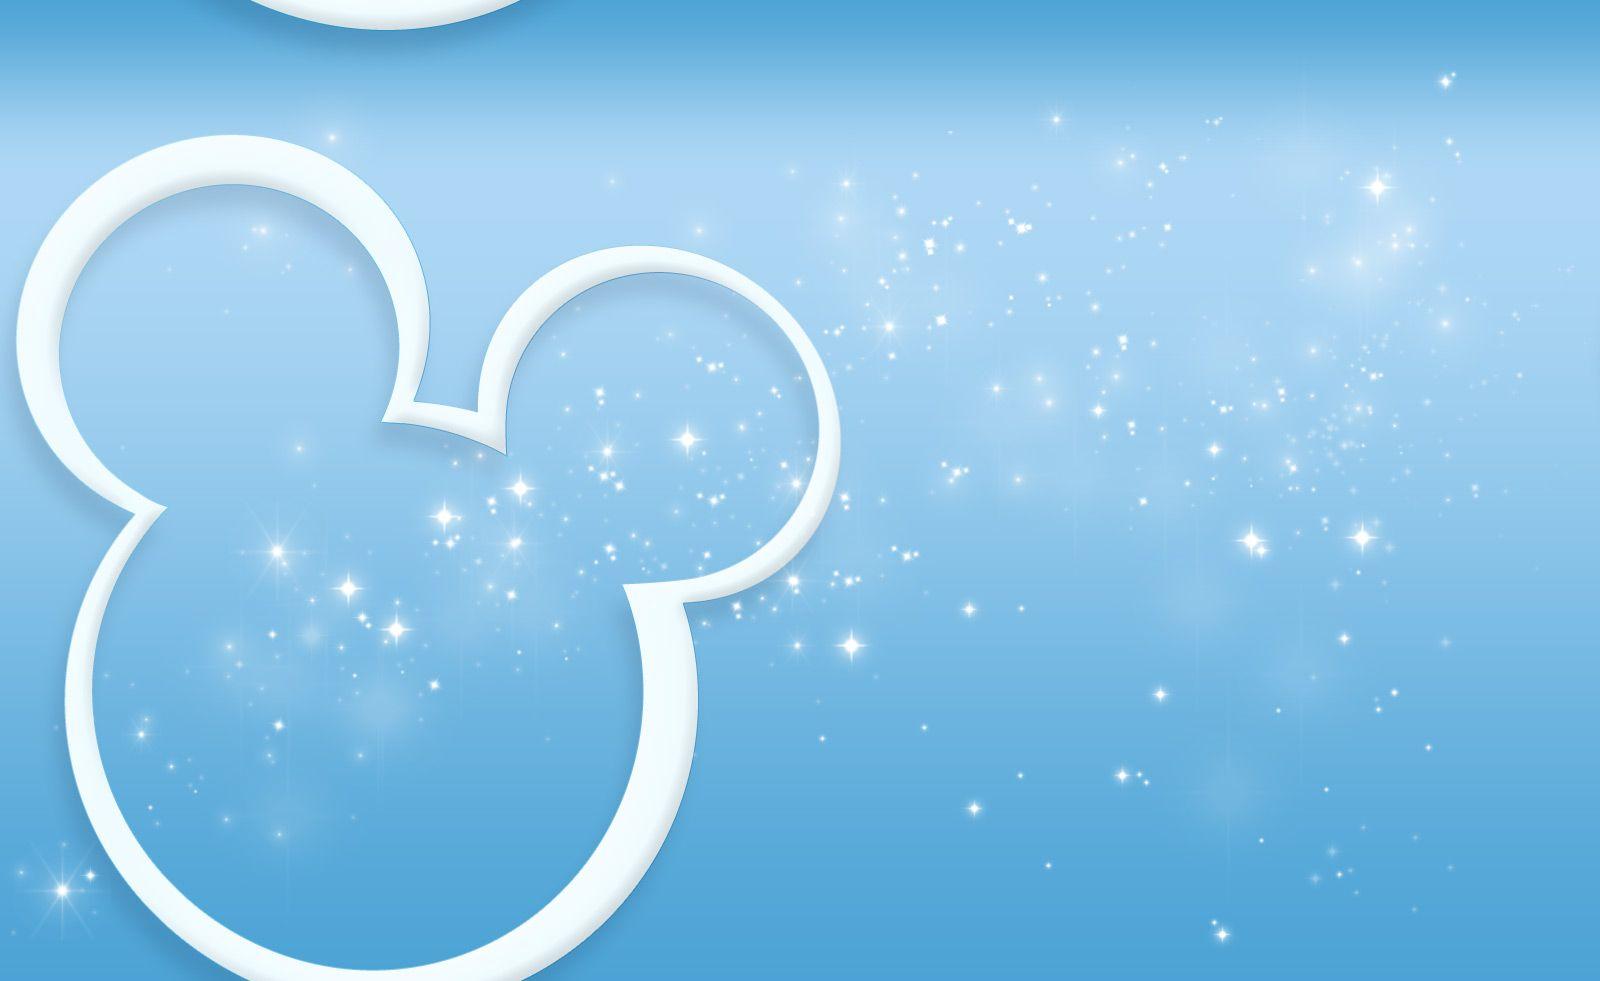 Disney Theme Free Wallpaper for Facebook®, Twitter® and other social